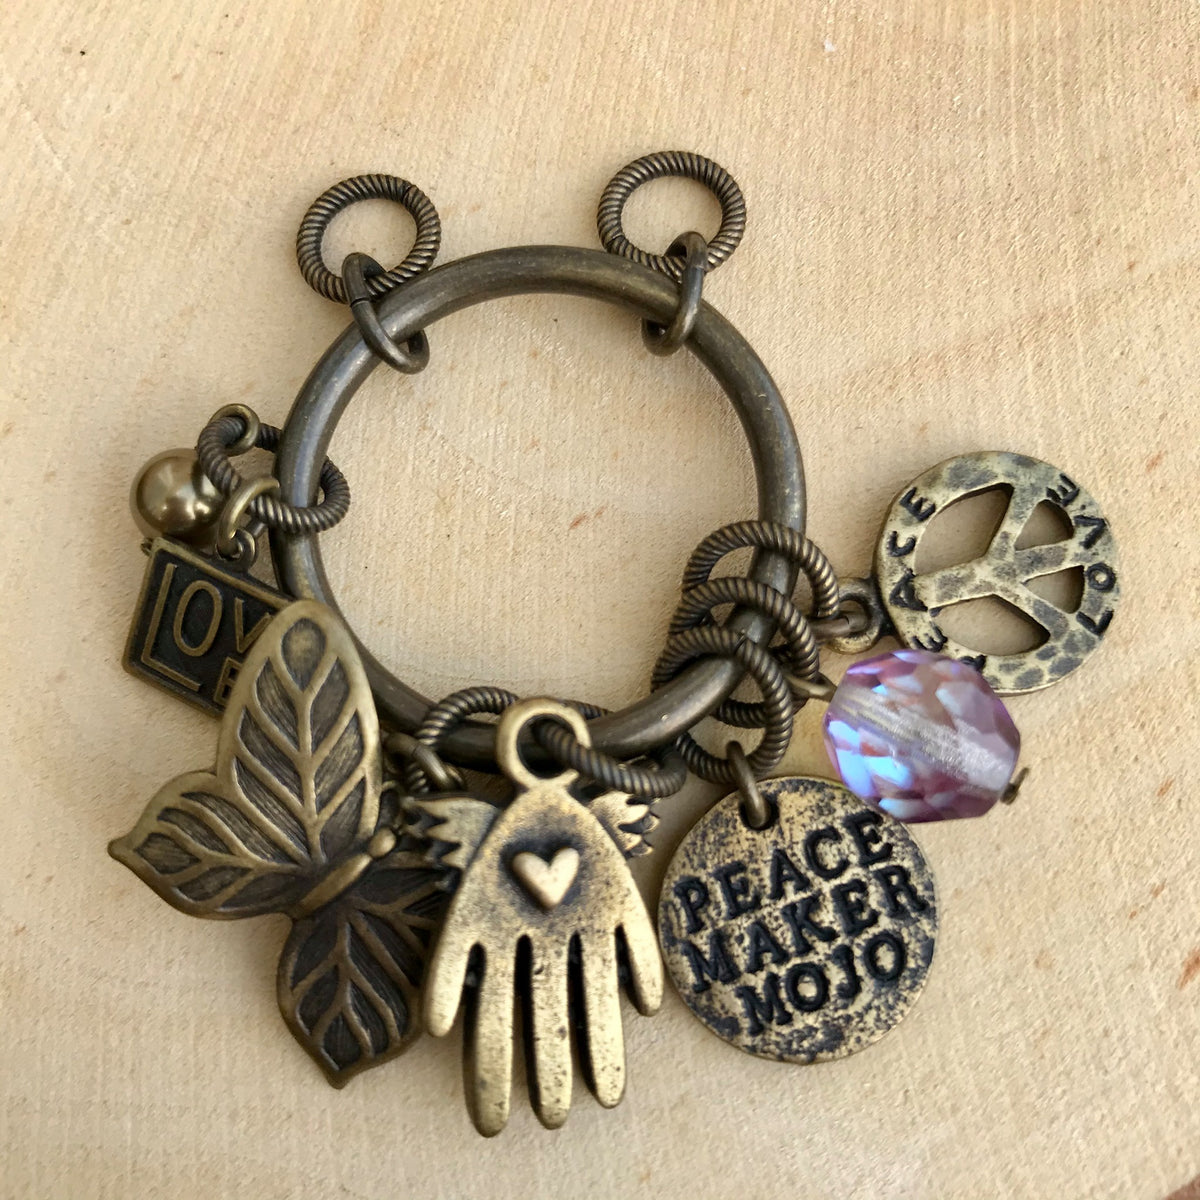 Antique brass Peace Maker Mojo pendant with LOVE, butterfly, hand, peace sign, and colored bead charms